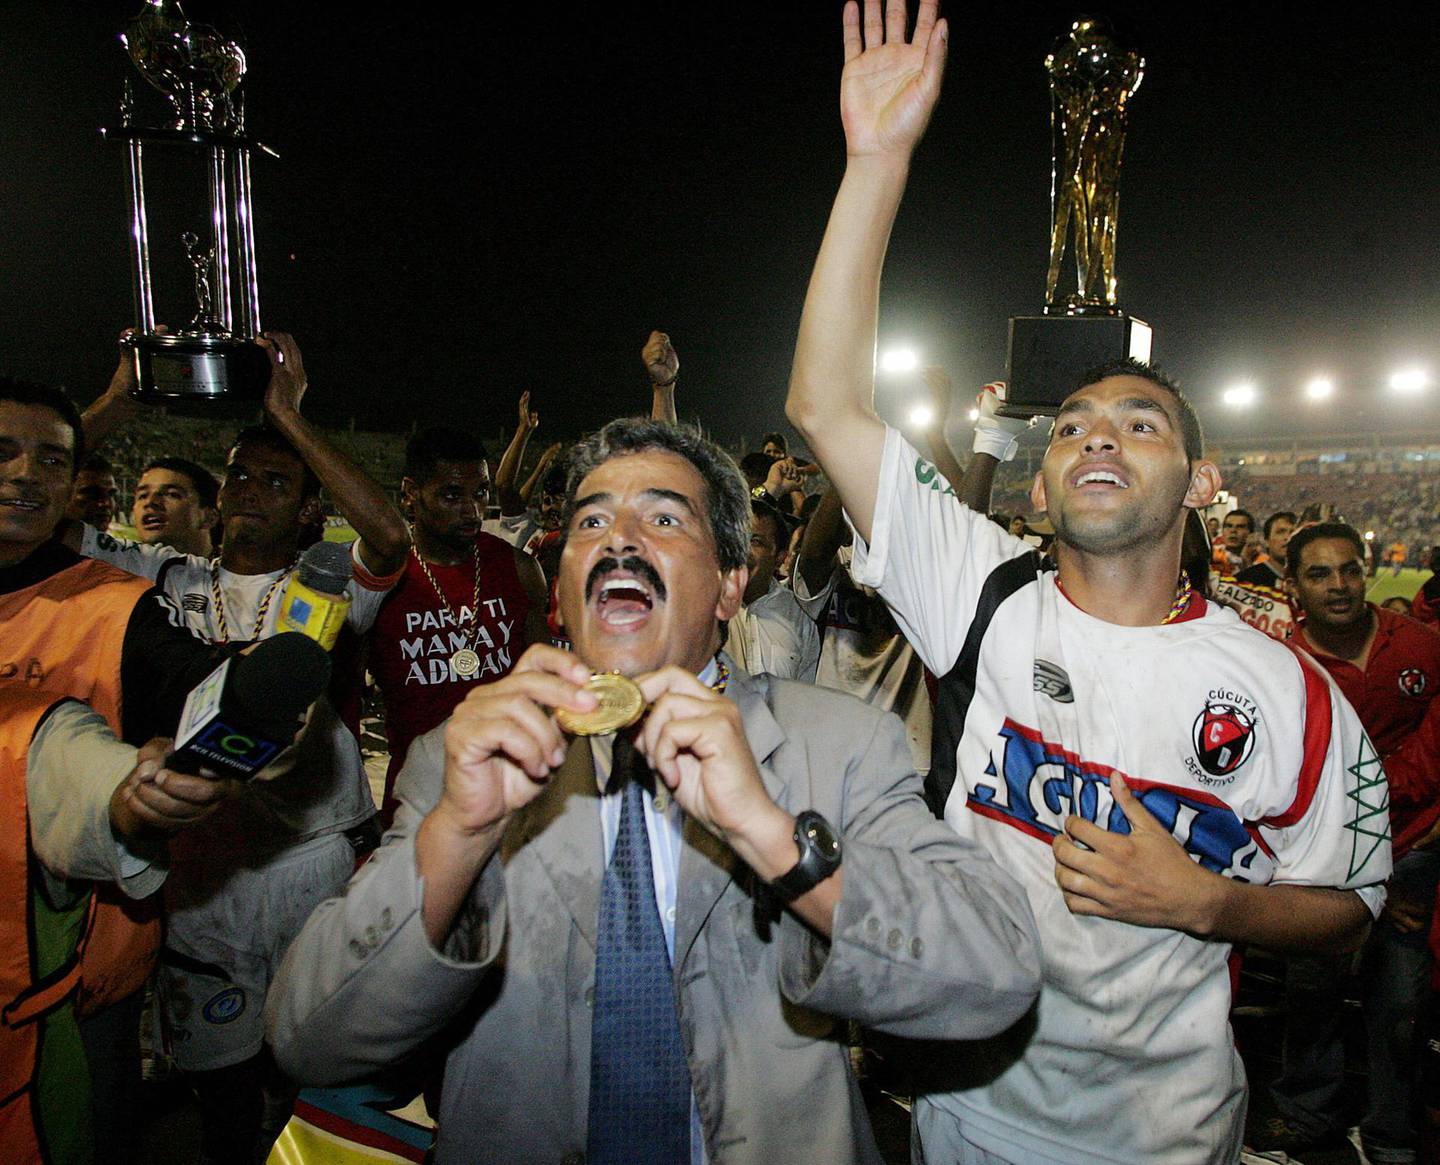 Deportivo Cucuta coach Jorge Luis Pinto (C) celebrates after his team defeated Deportes Tolima during the final game of the Colombian National Football League 20 December, 2006, at Manuel Murillo Toro stadium in Ibague, Colombia. AFP PHOTO/Mauricio DUEÑAS (Photo by MAURICIO DUENAS / AFP)